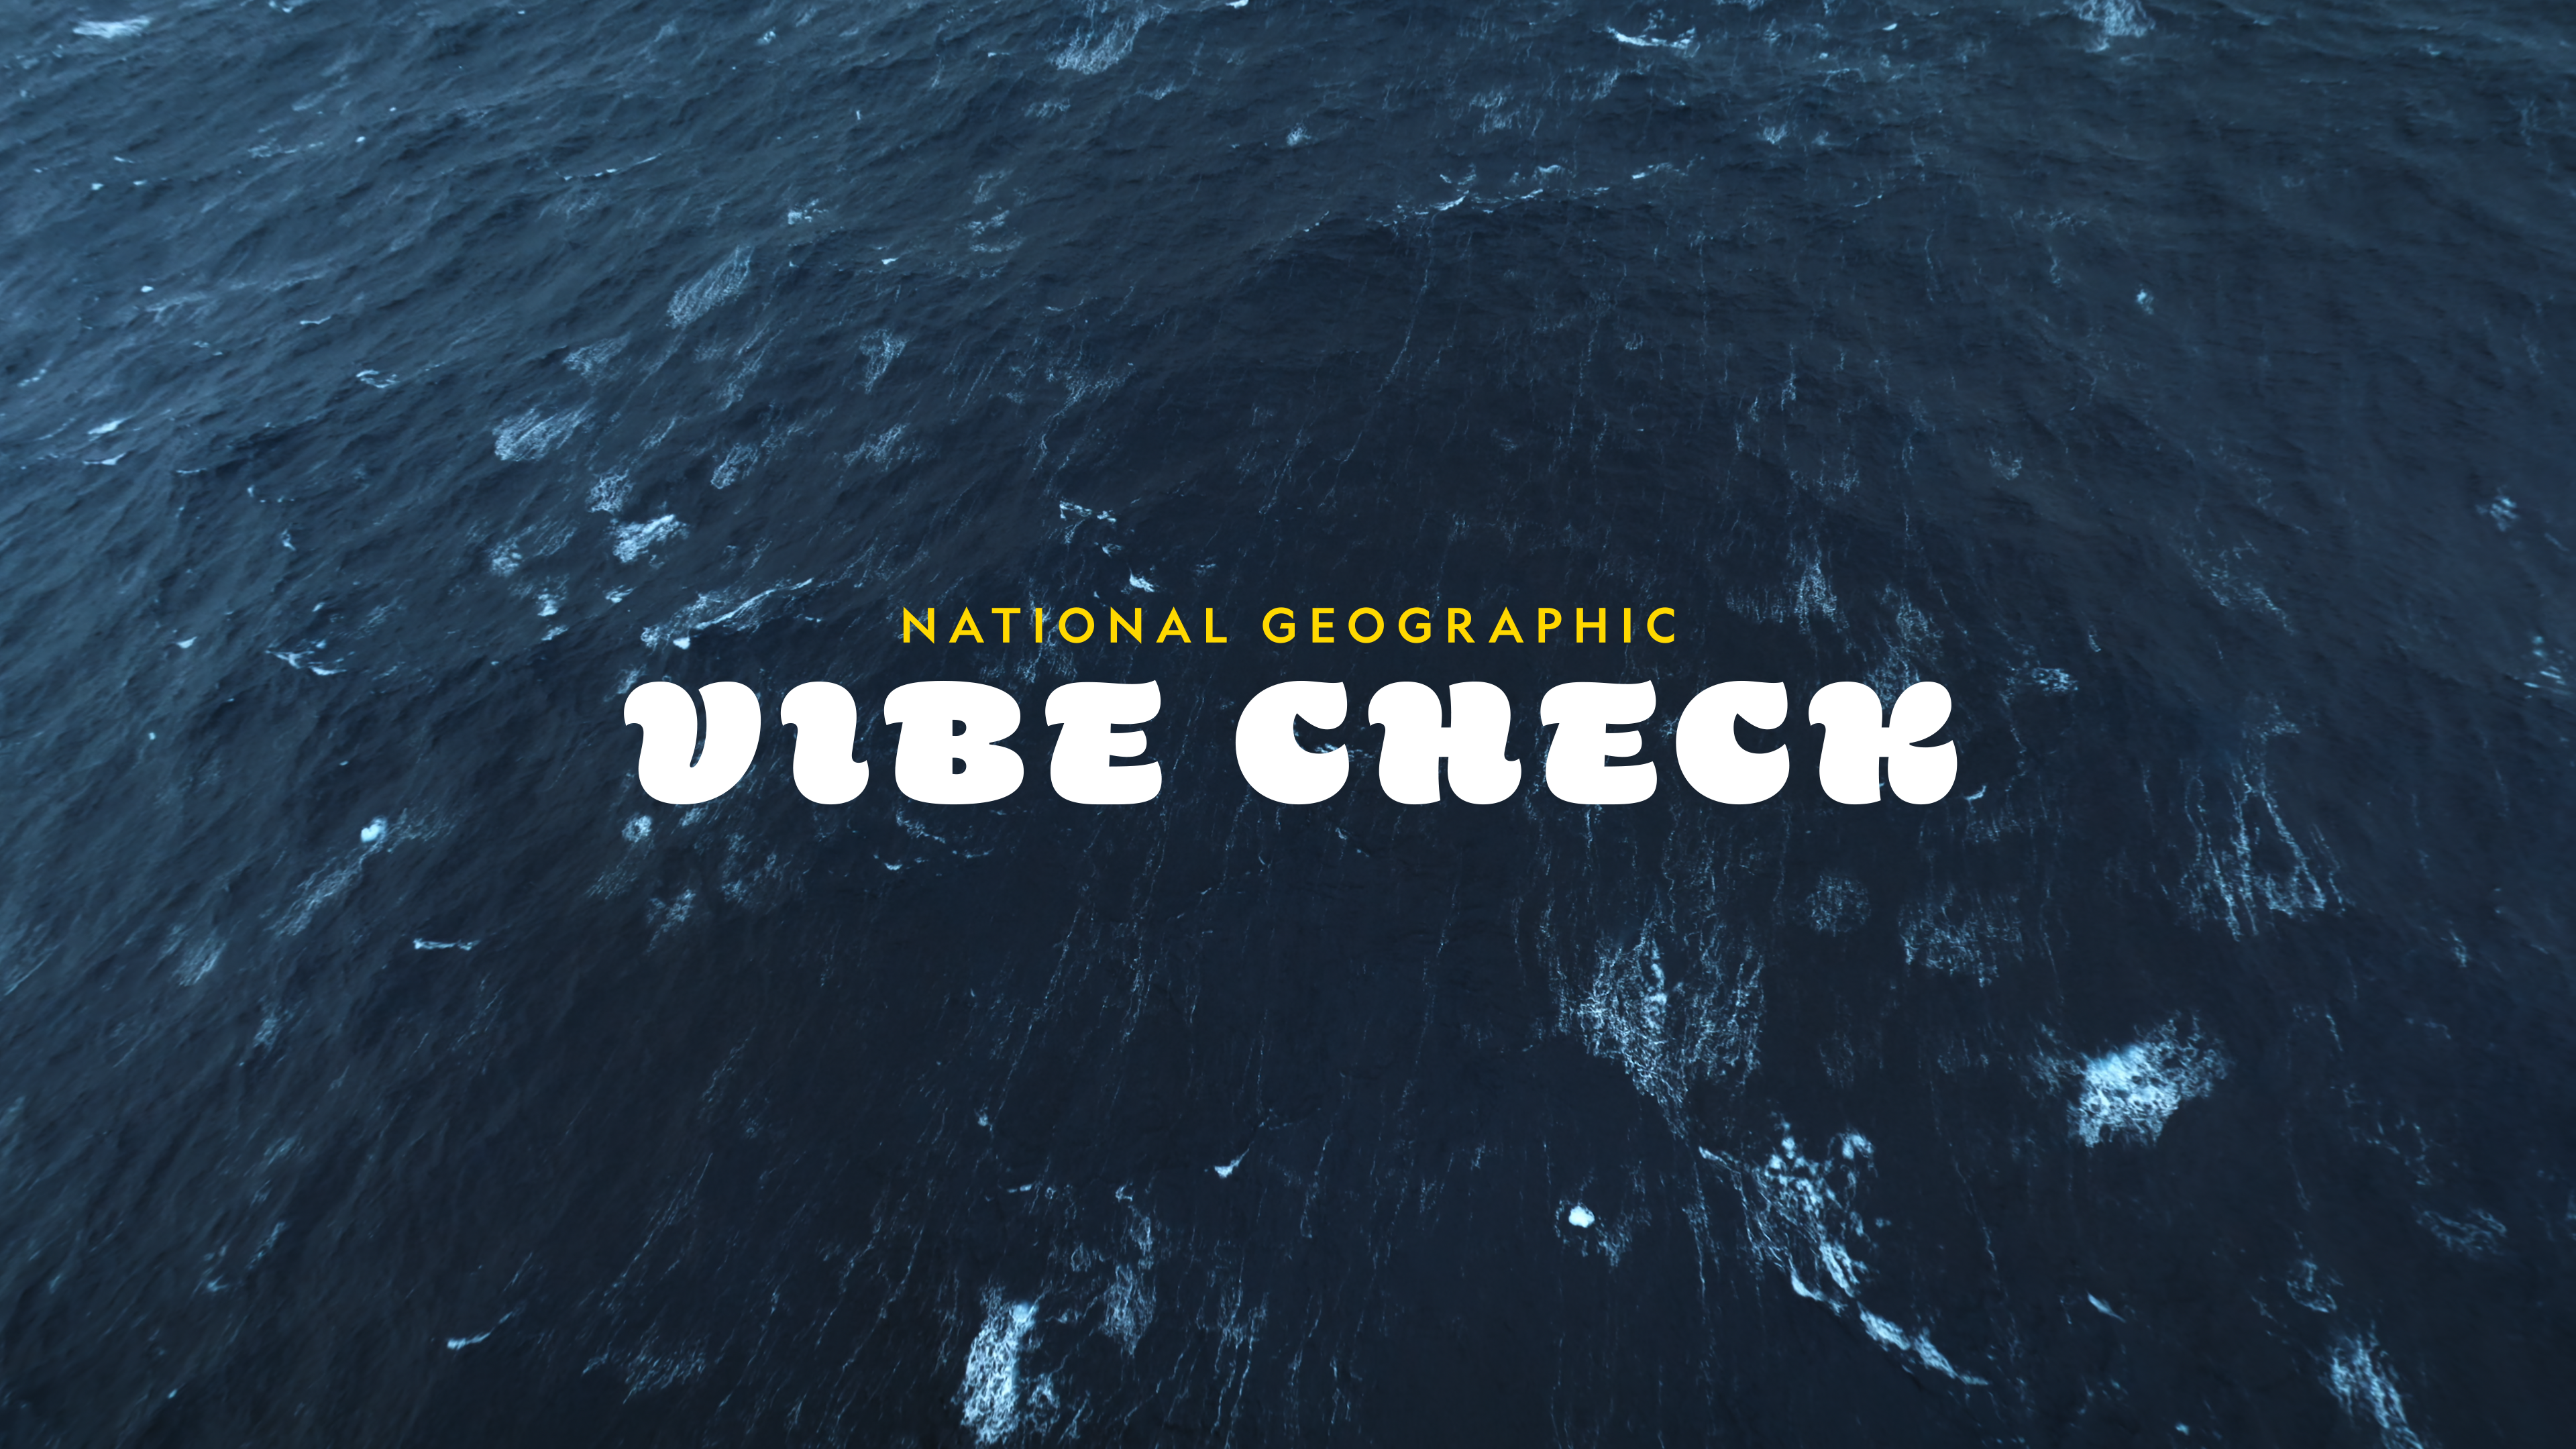 NATIONAL GEOGRAPHIC RELEASES VIBE CHECK X NAT GEO MEDITATIVE VIDEOS ON YOUTUBE